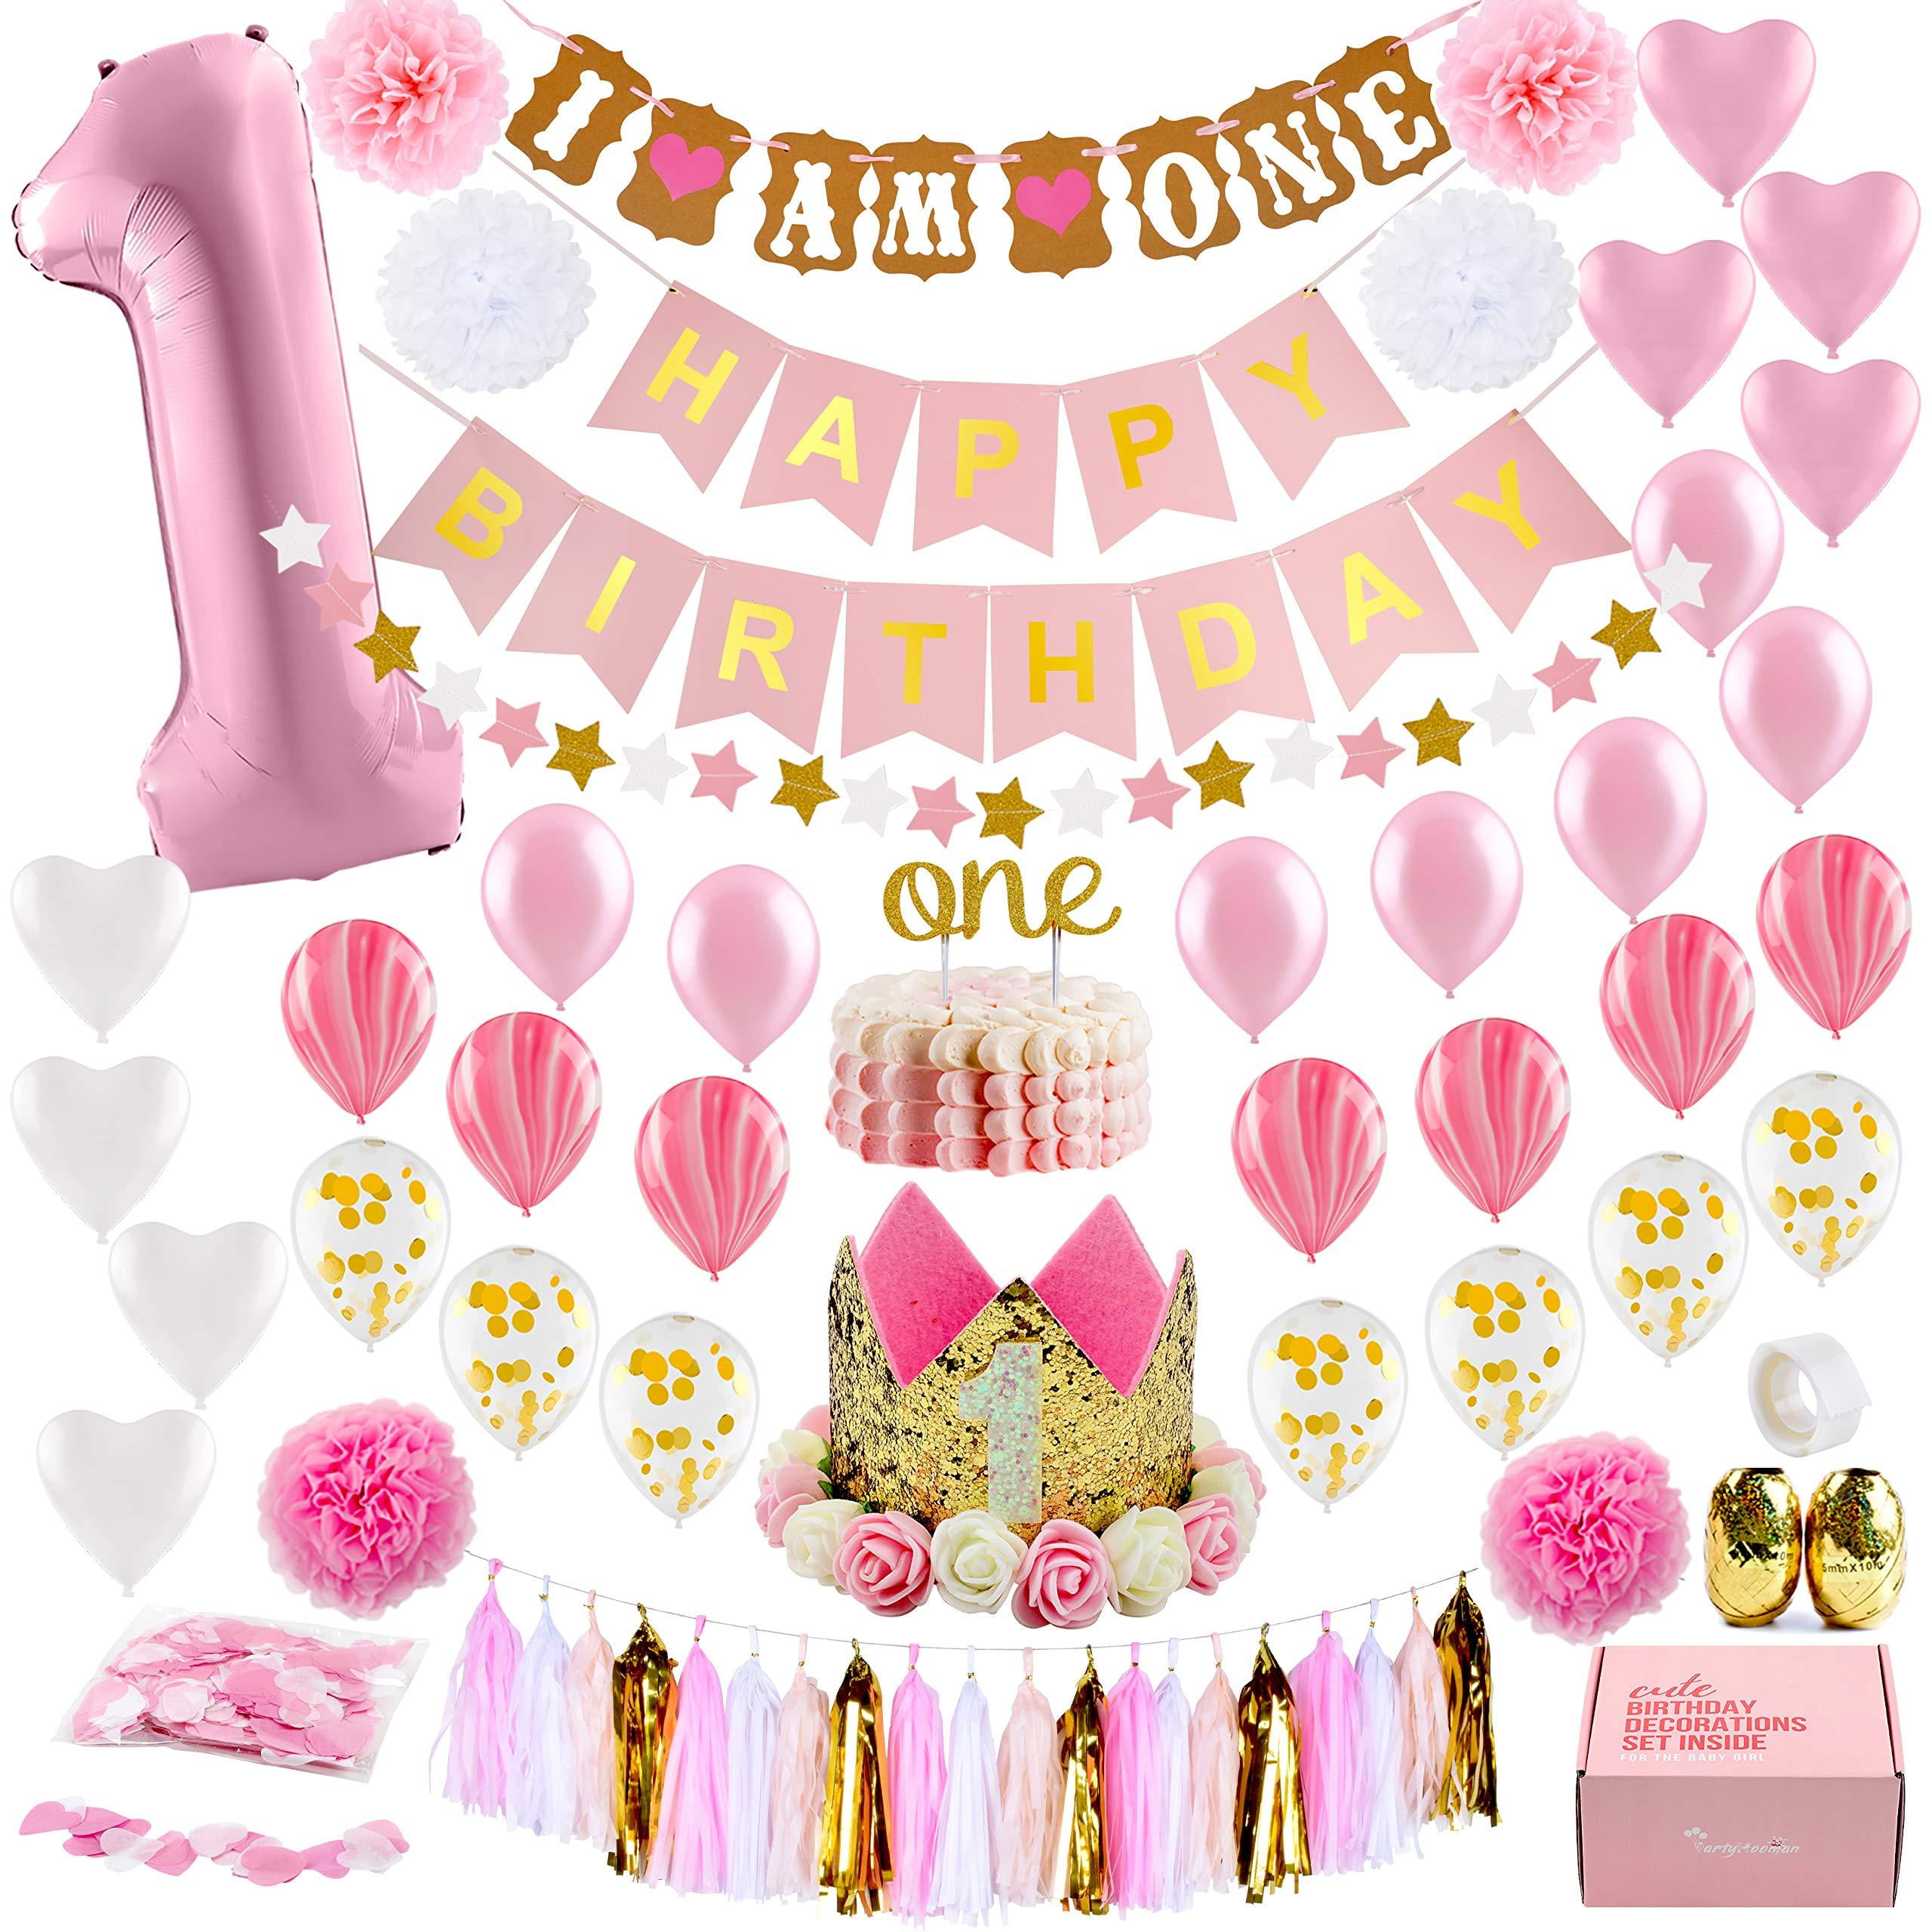 GIRLS PERSONALISED BIRTHDAY PARTY BANNER PINK AND GOLD BUNTING ANY SINGLE NAME 